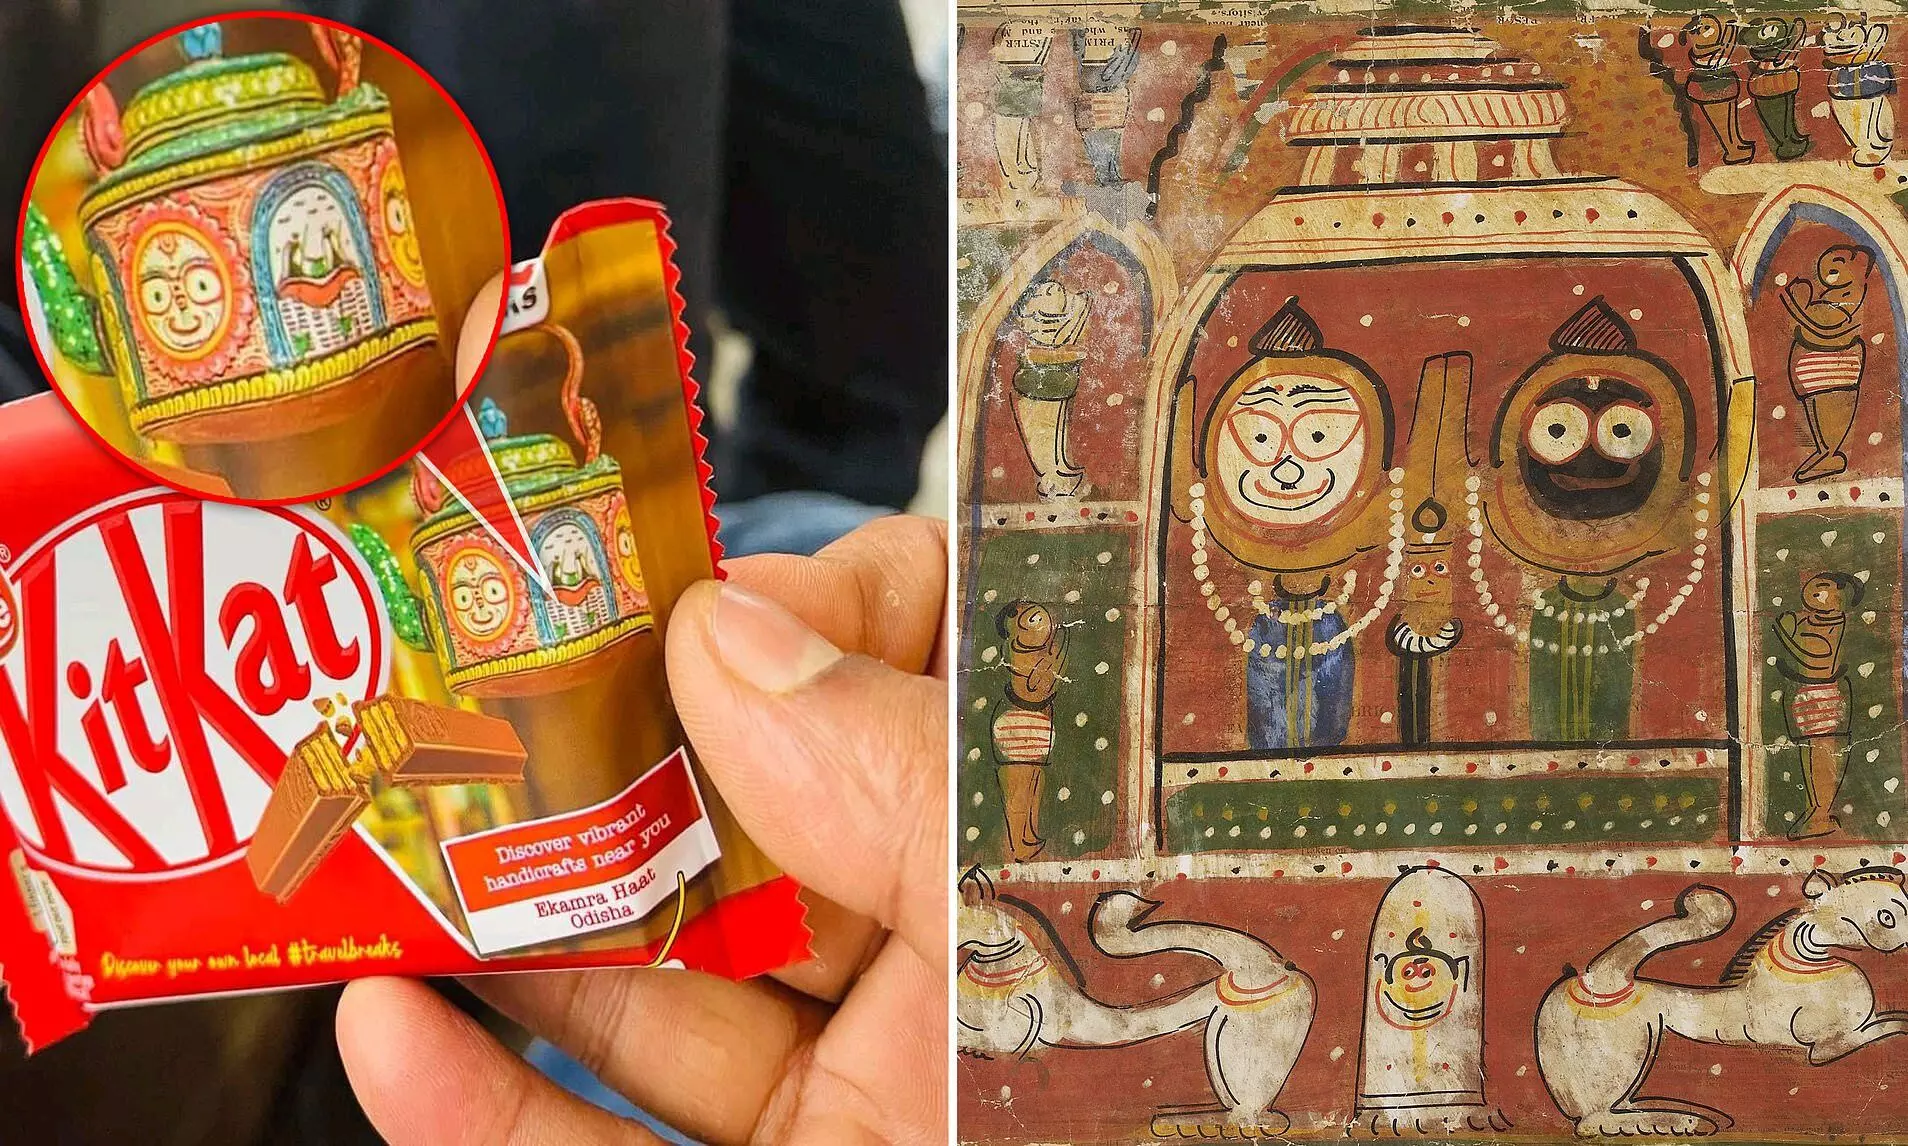 Hindu deities on chocolate wrappers: Nestle to discontinue KitKat bars following protests